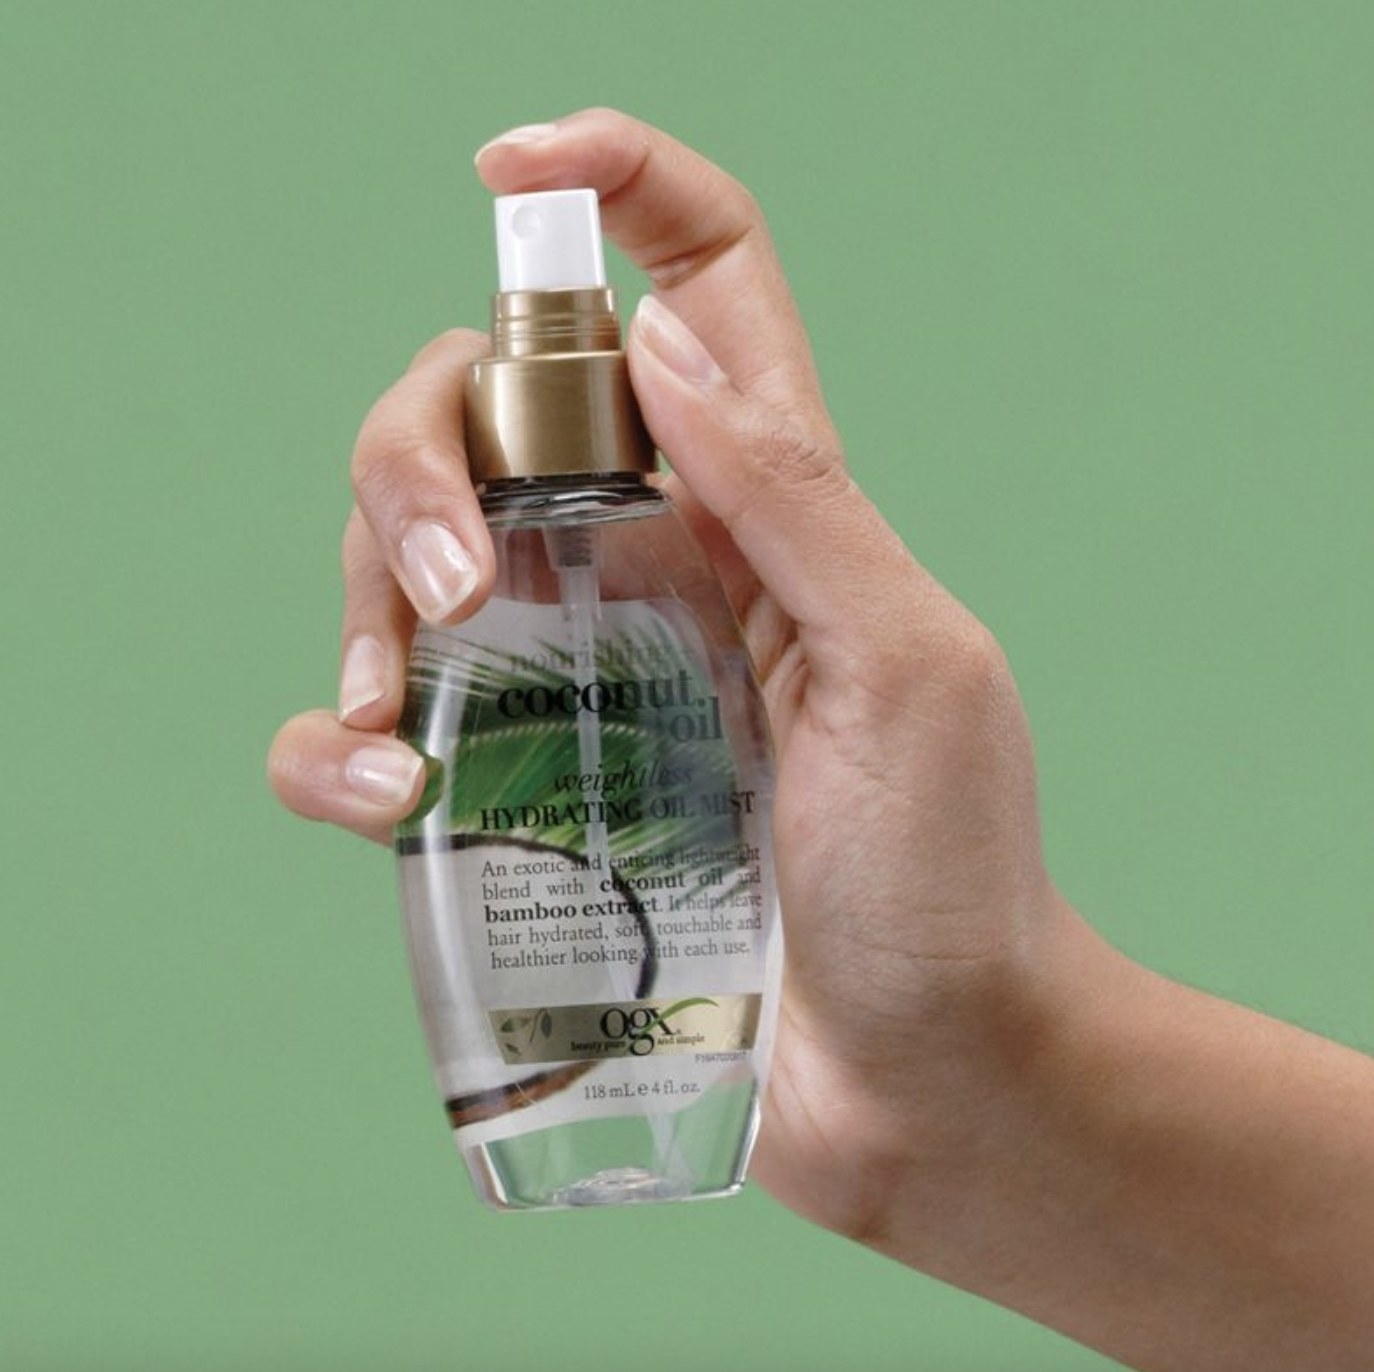 A person holding a small bottle of oil mist